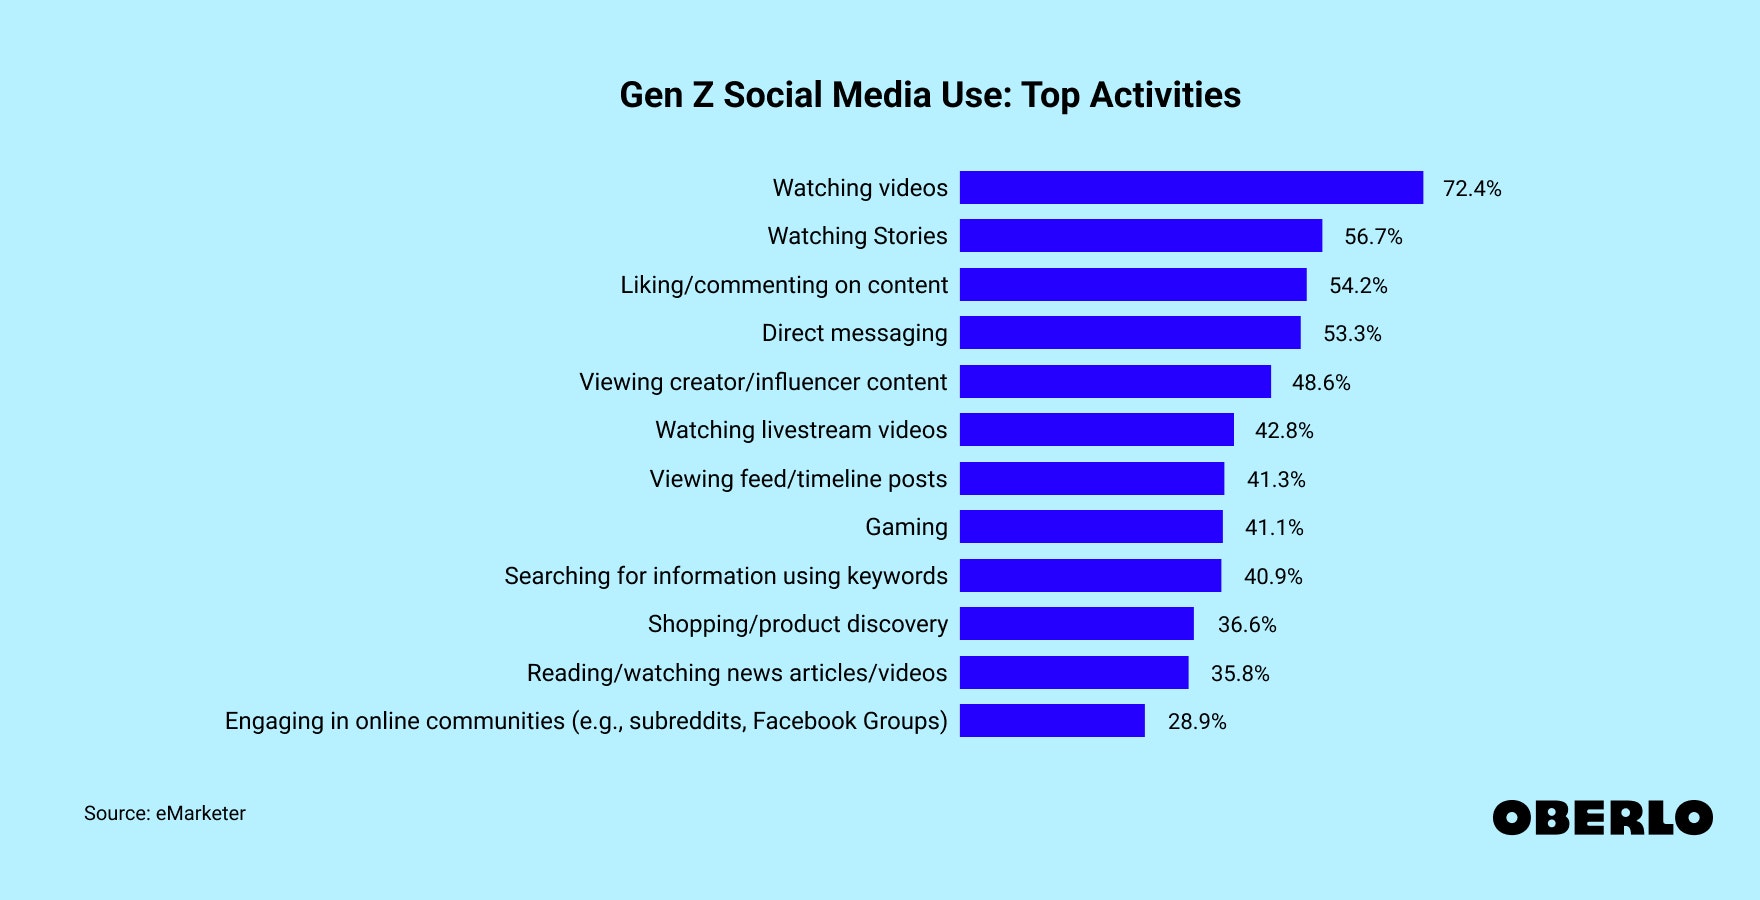 Chart showing Gen Z's social media use and top activities